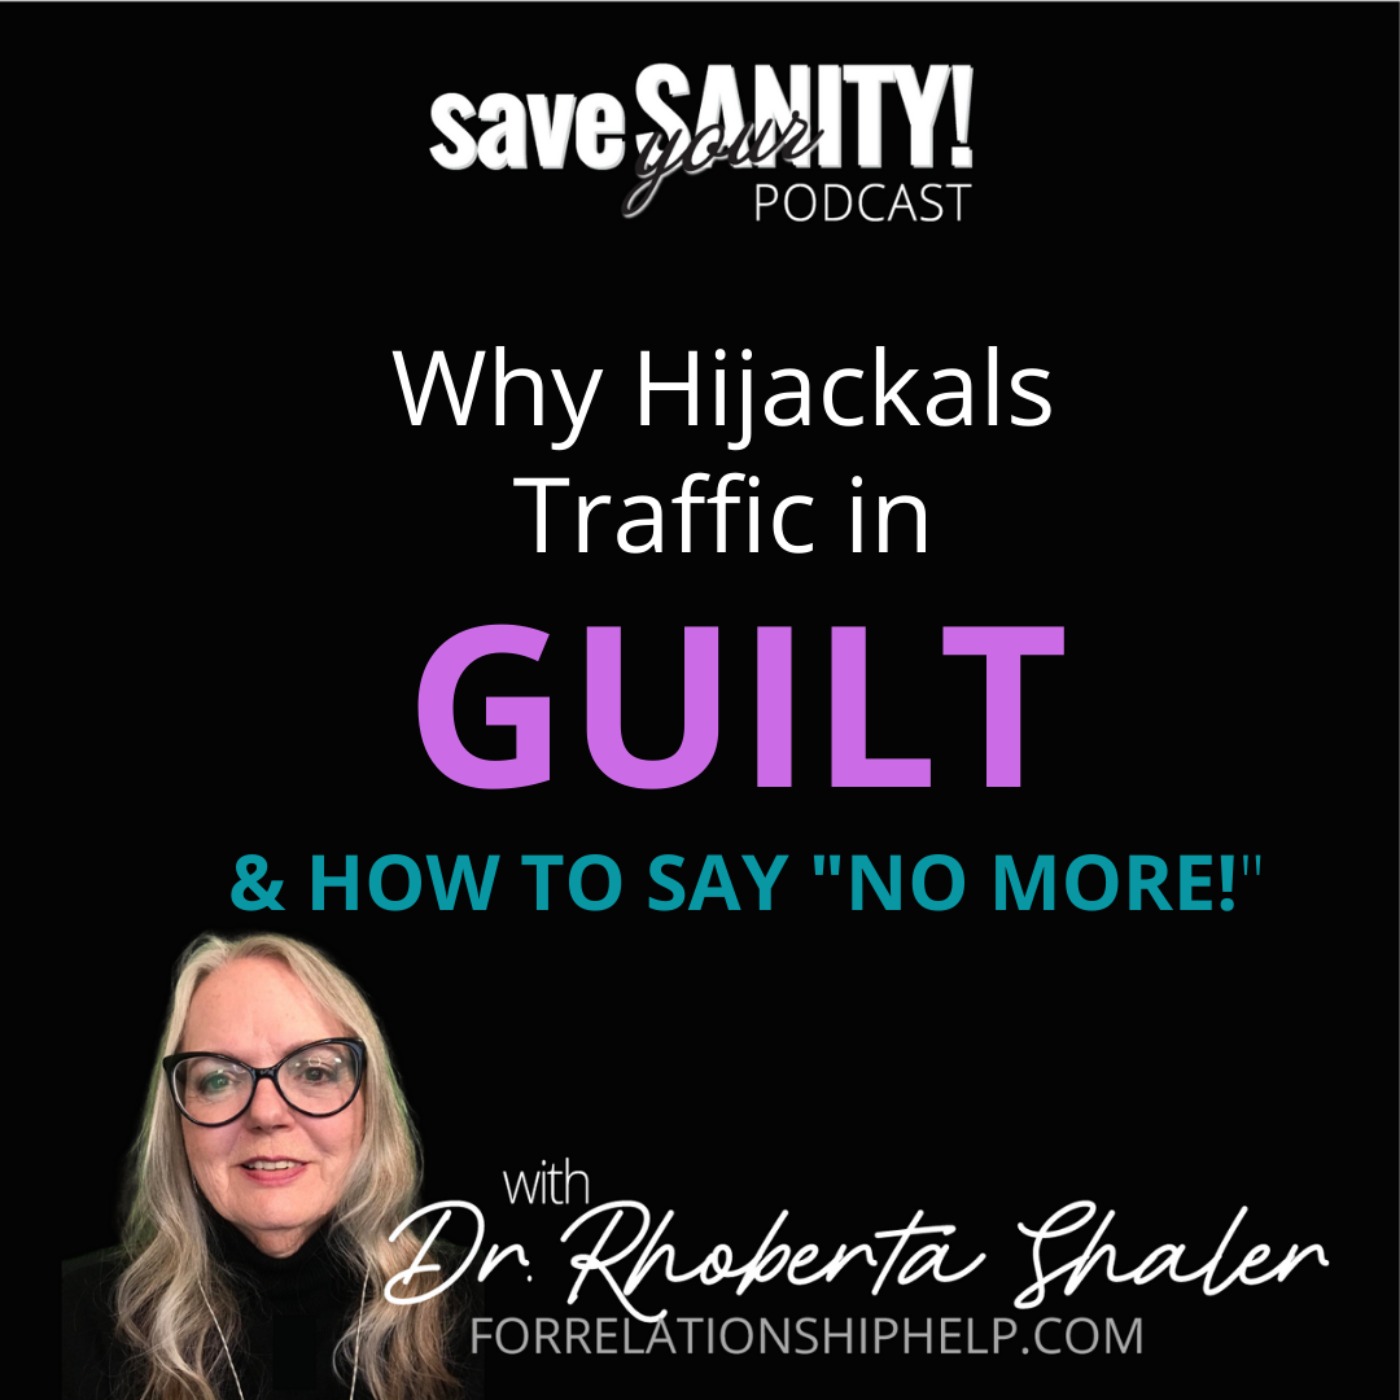 Why Hijackals Traffic in Guilt